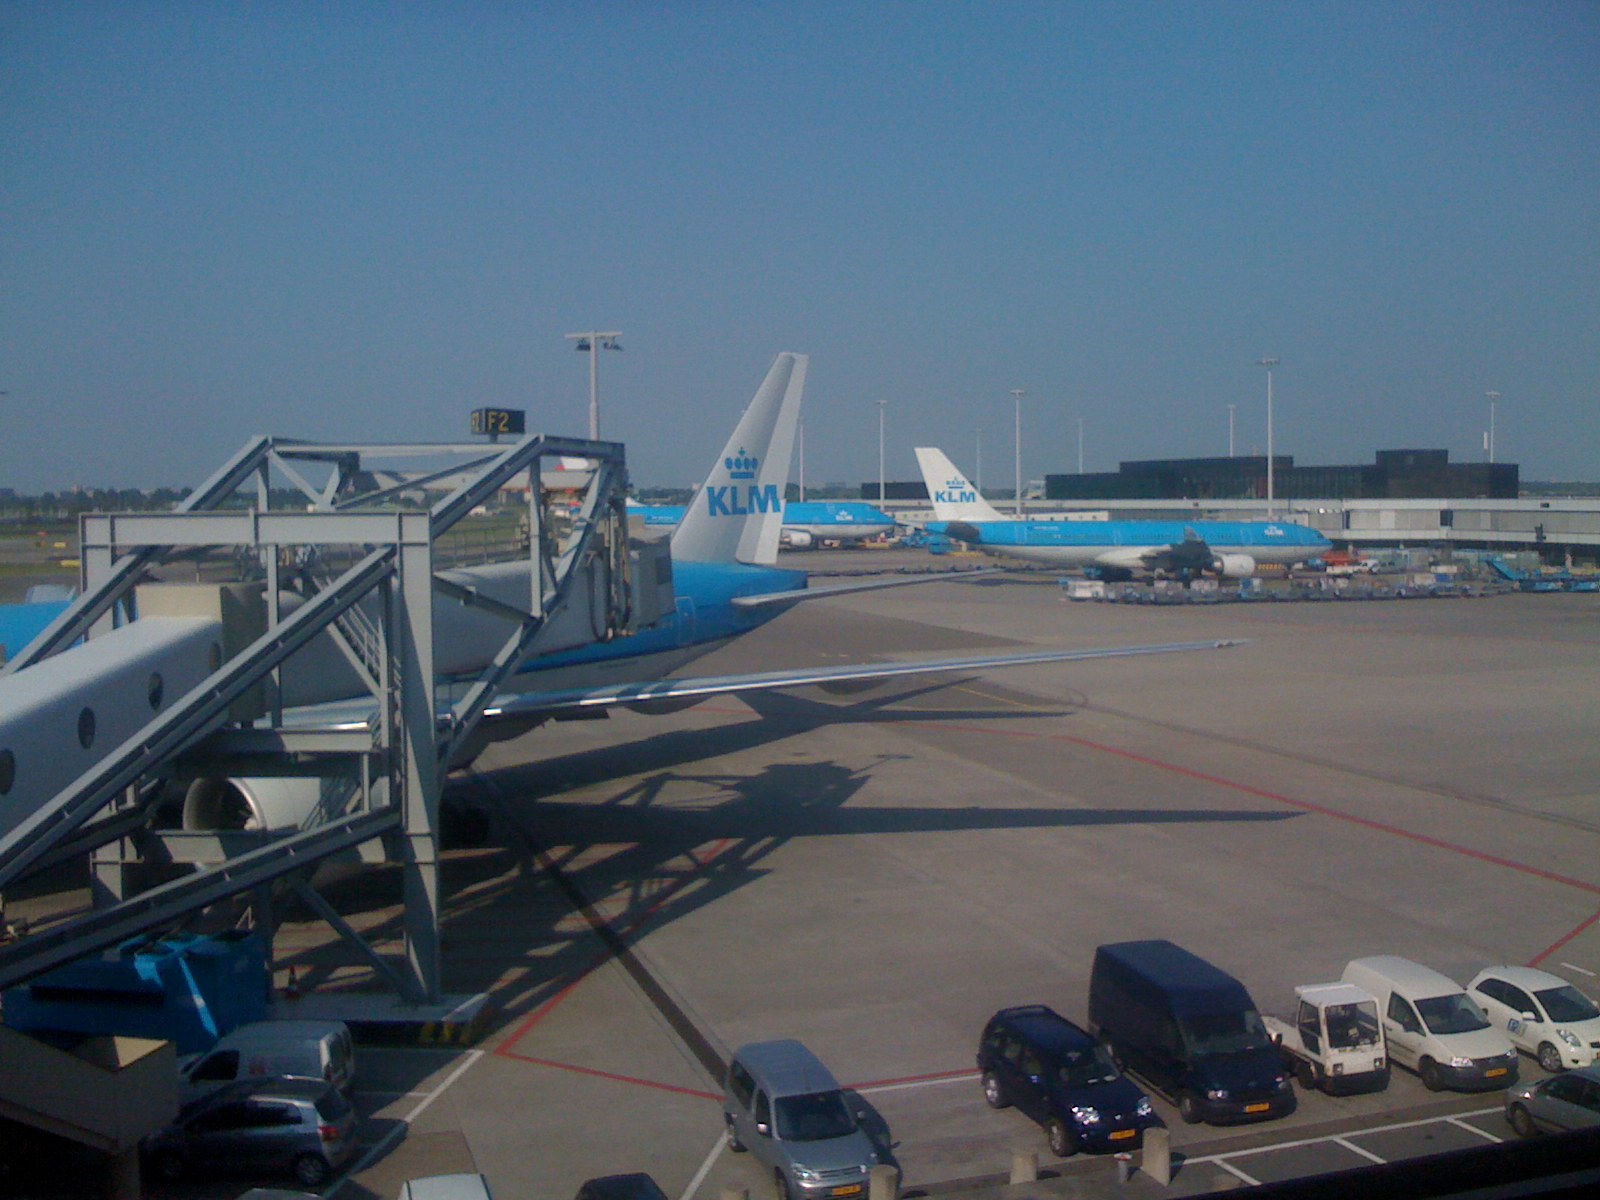 Schiphol airport before flying back to Shanghai